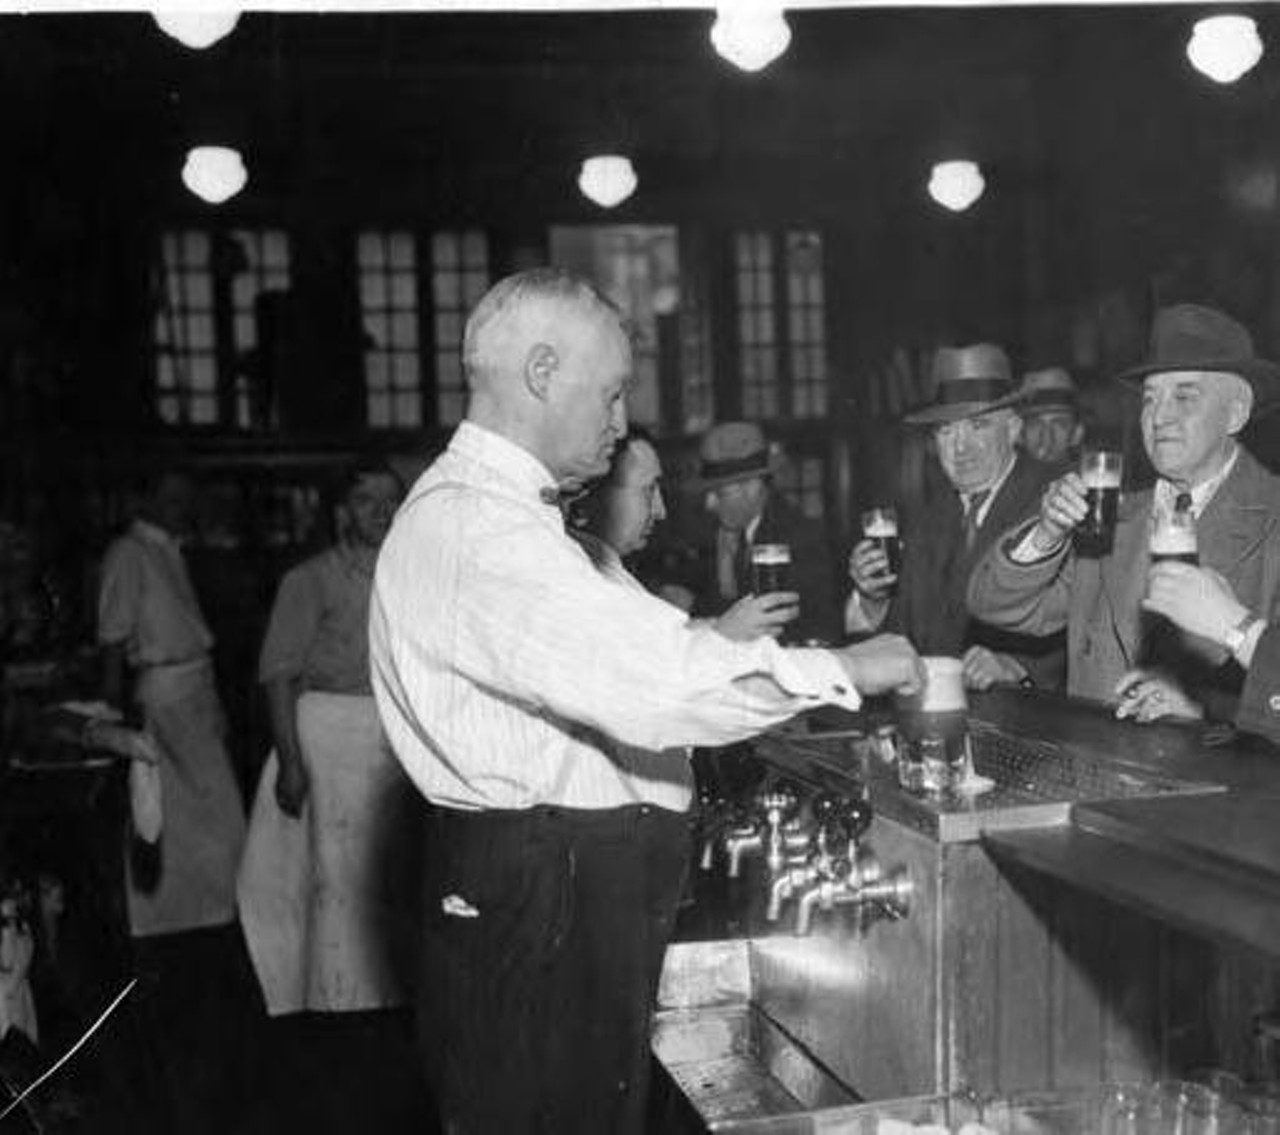 Otto Moser tends bar in downtown Cleveland, 1933.